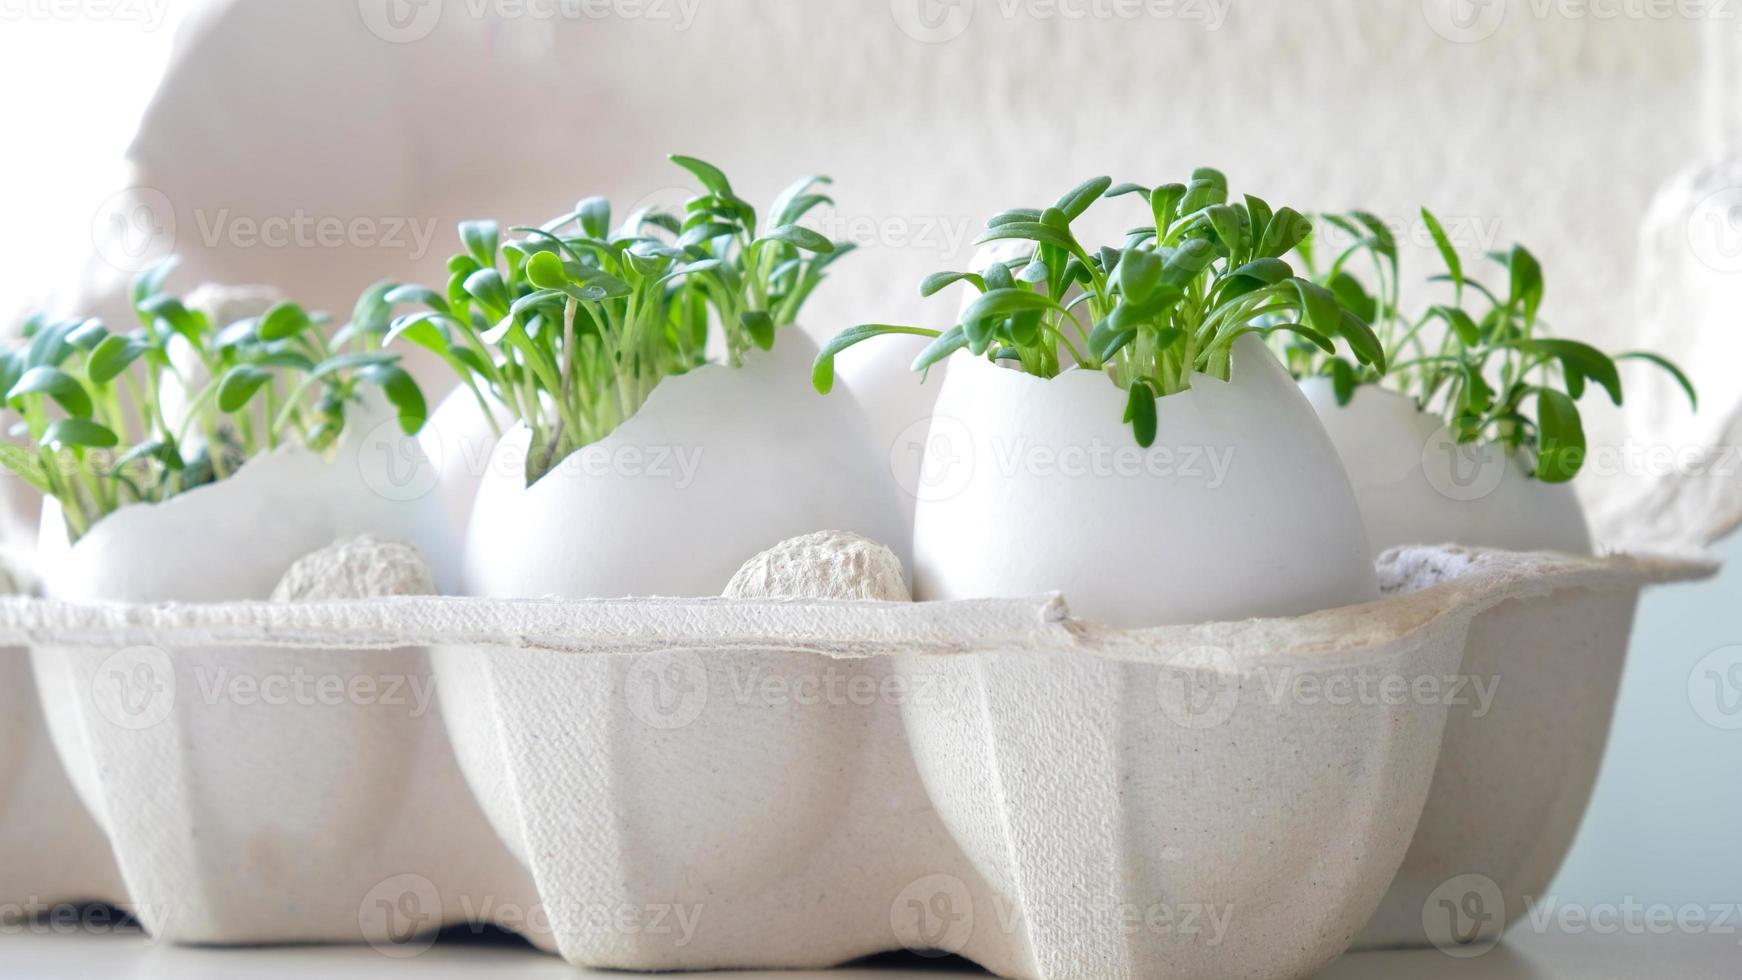 Fresh microgreens watercress grows in an white egg shell in paper egg box. Vegan and healthy eating concept. Creative eco concept. Zero waste. Close-up. Easter banner. photo